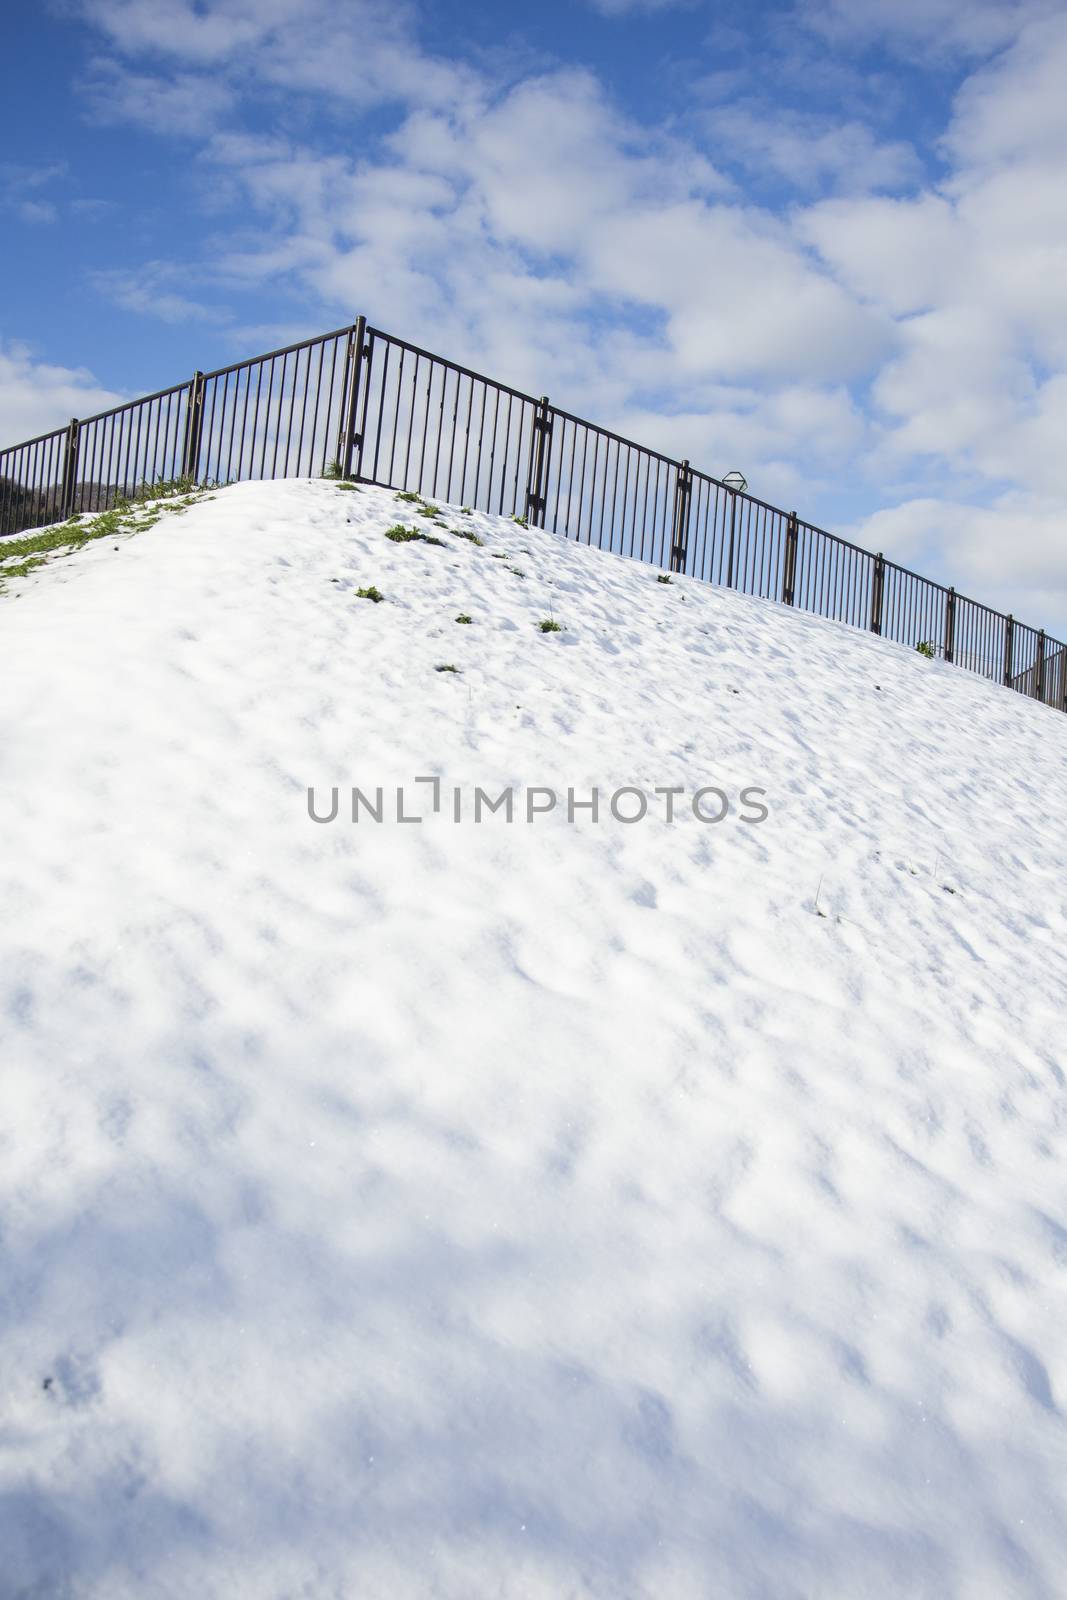 Stairway in park winter season with snow